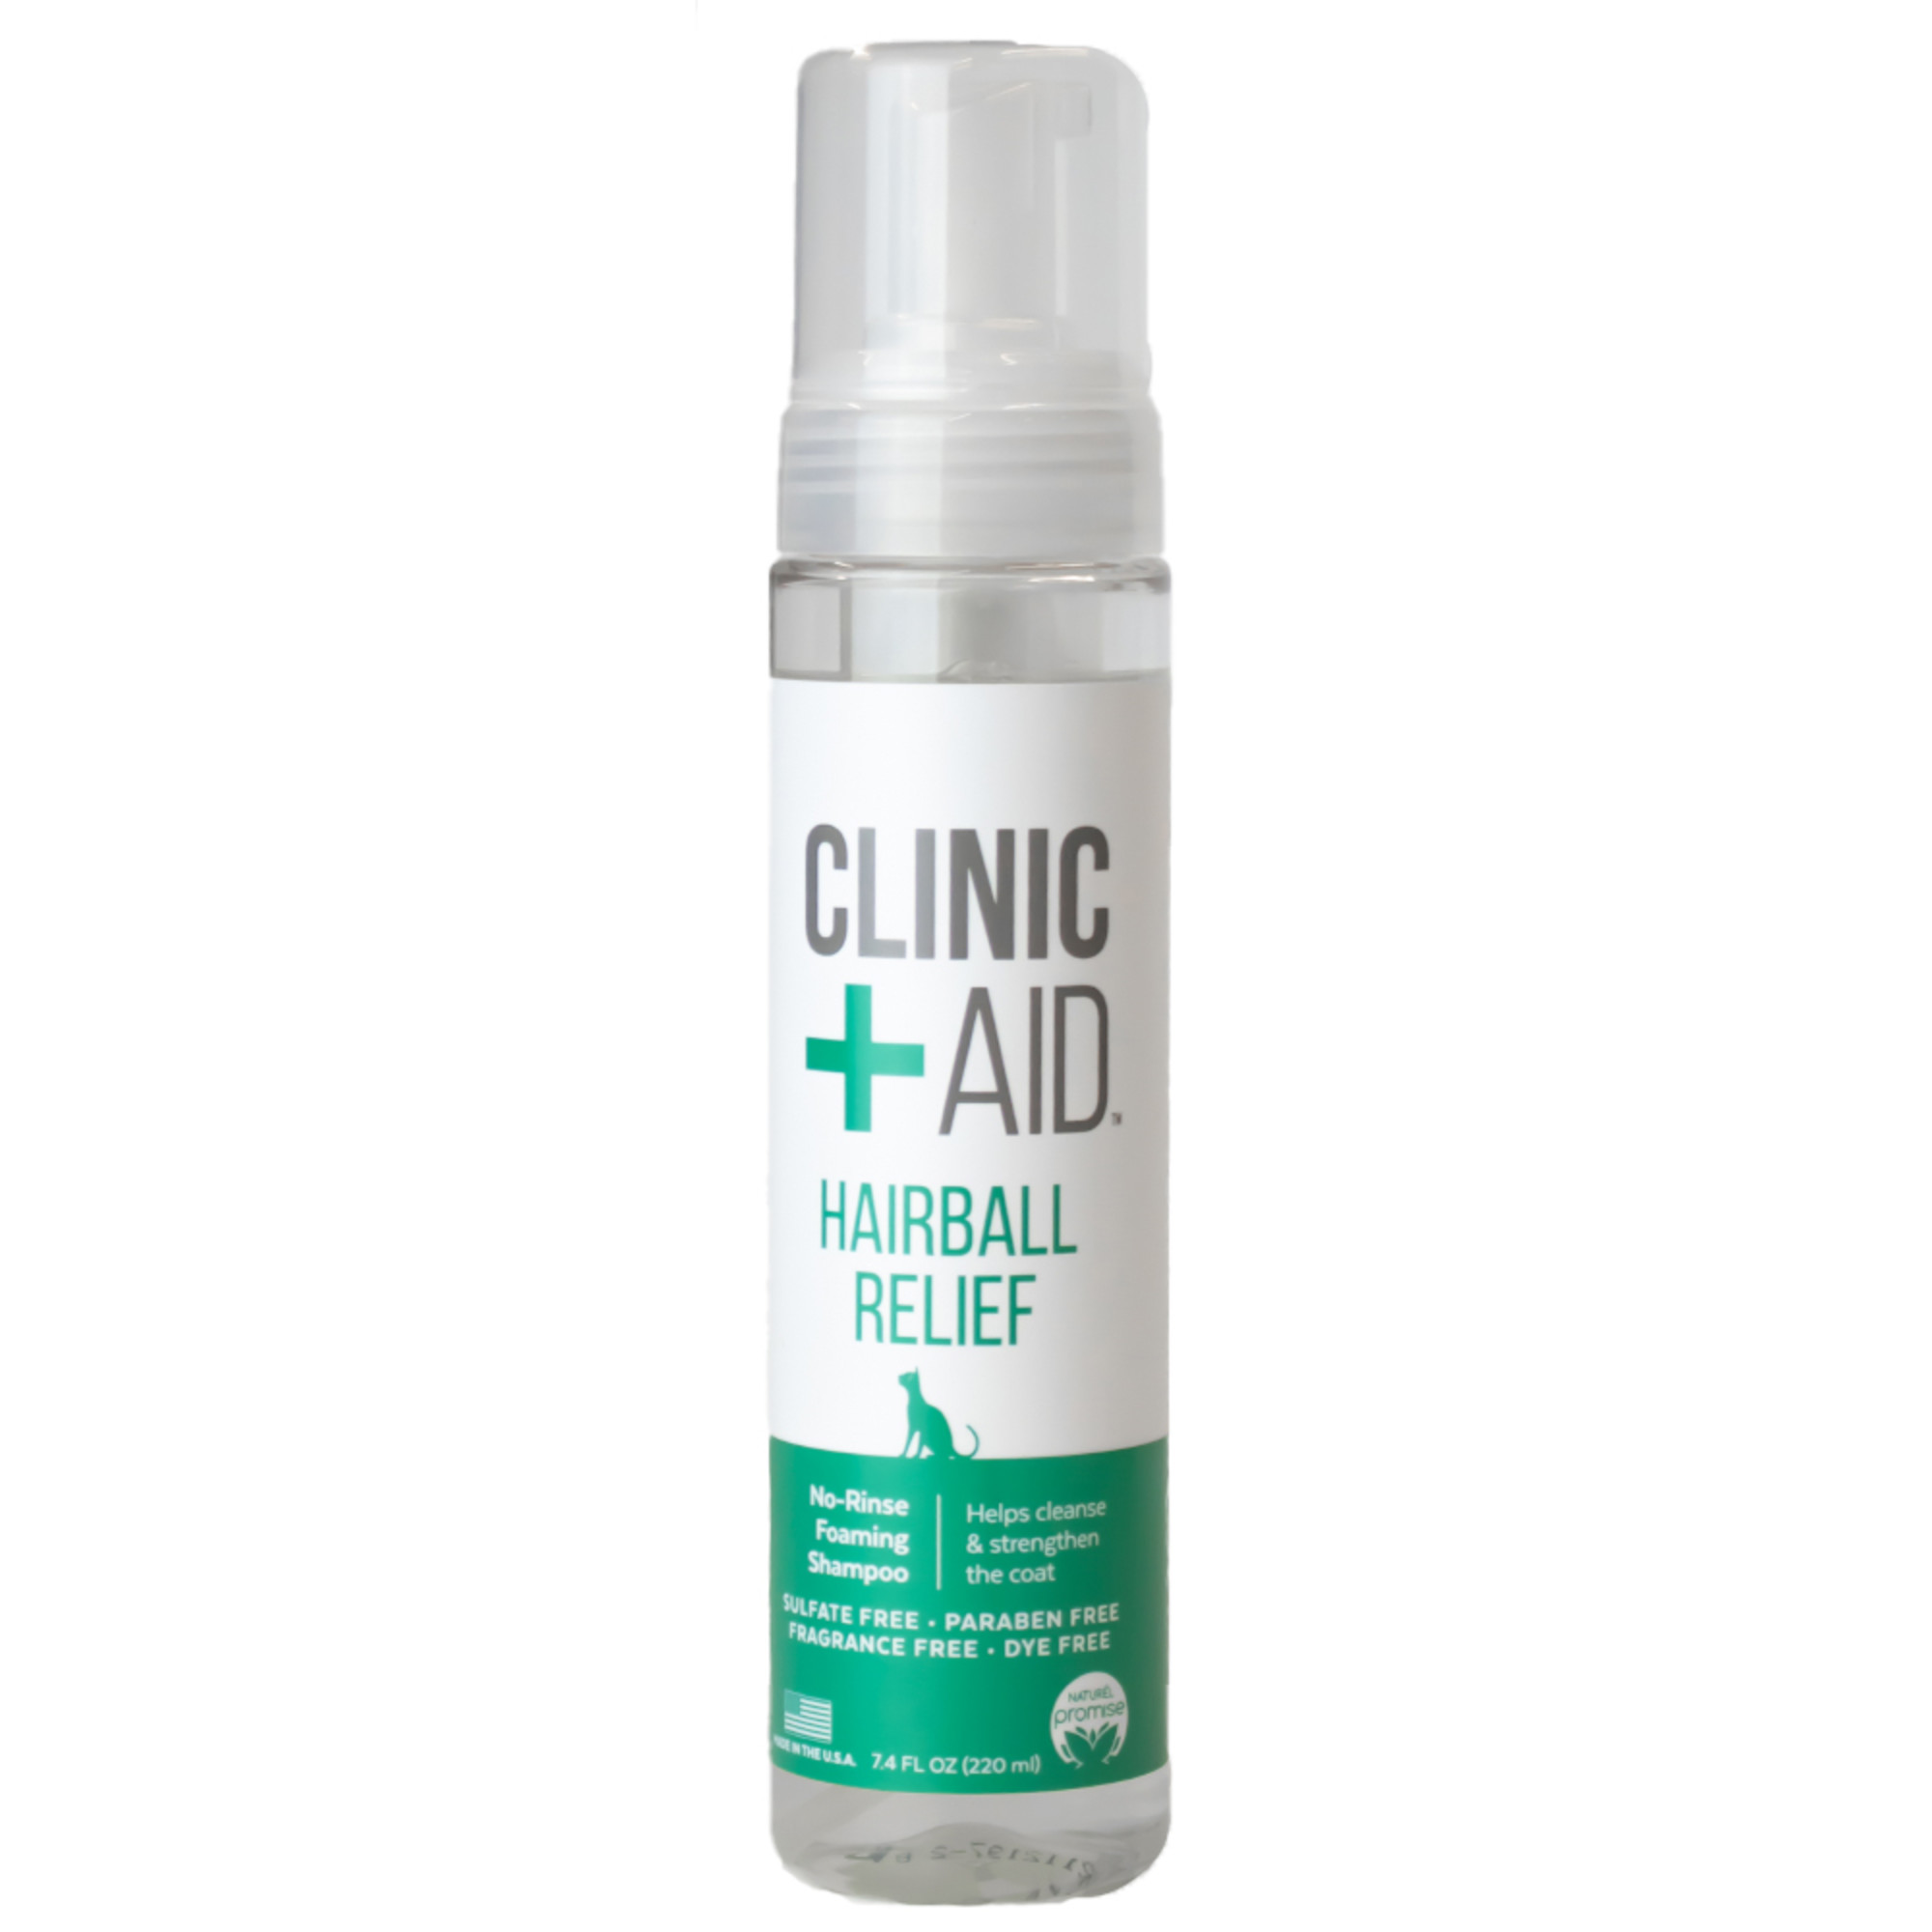 Naturel Promise Clinic Aid Hairball Relief No-Rinse Foaming Shampoo For Cats [Vol: 7.4 fl oz.]